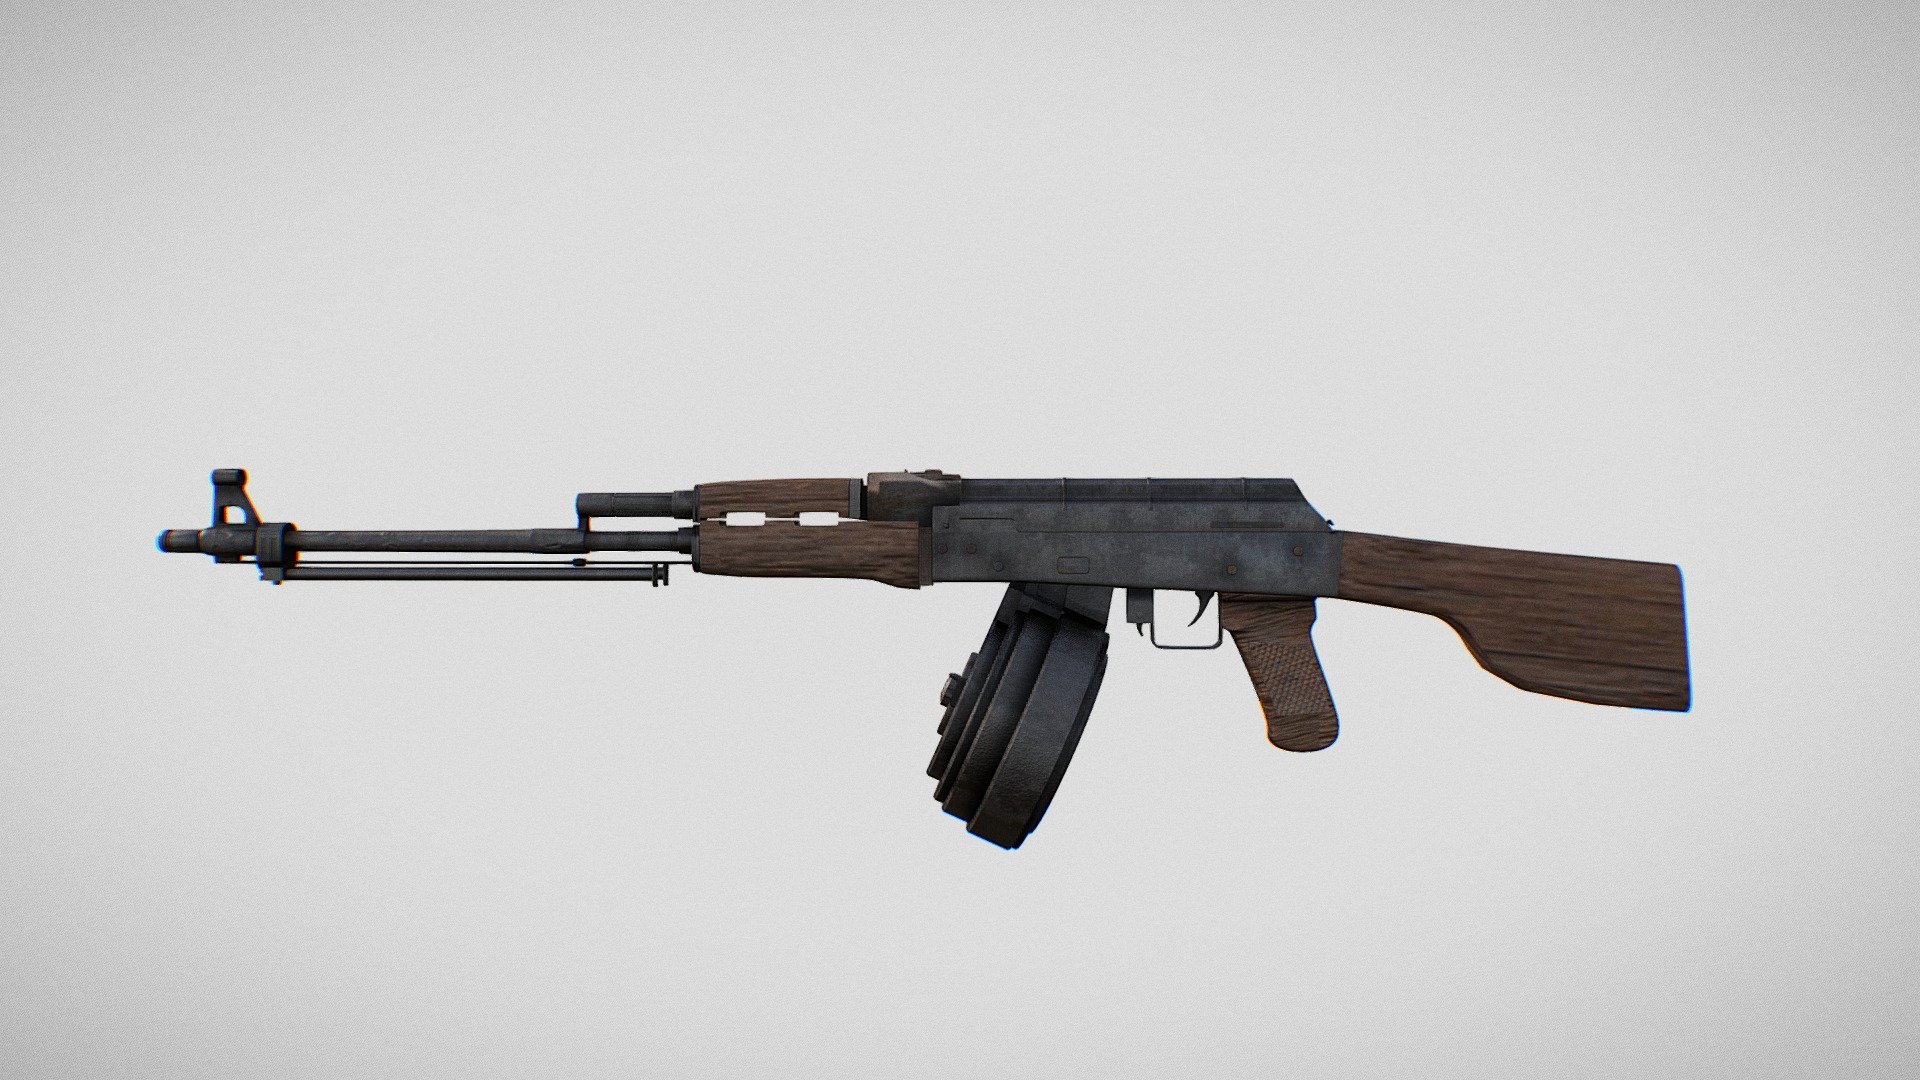 This is a 3D model of an RPK LMG I made using Blender, which uses most of parts of the AK-47 model that I previously made 3d model